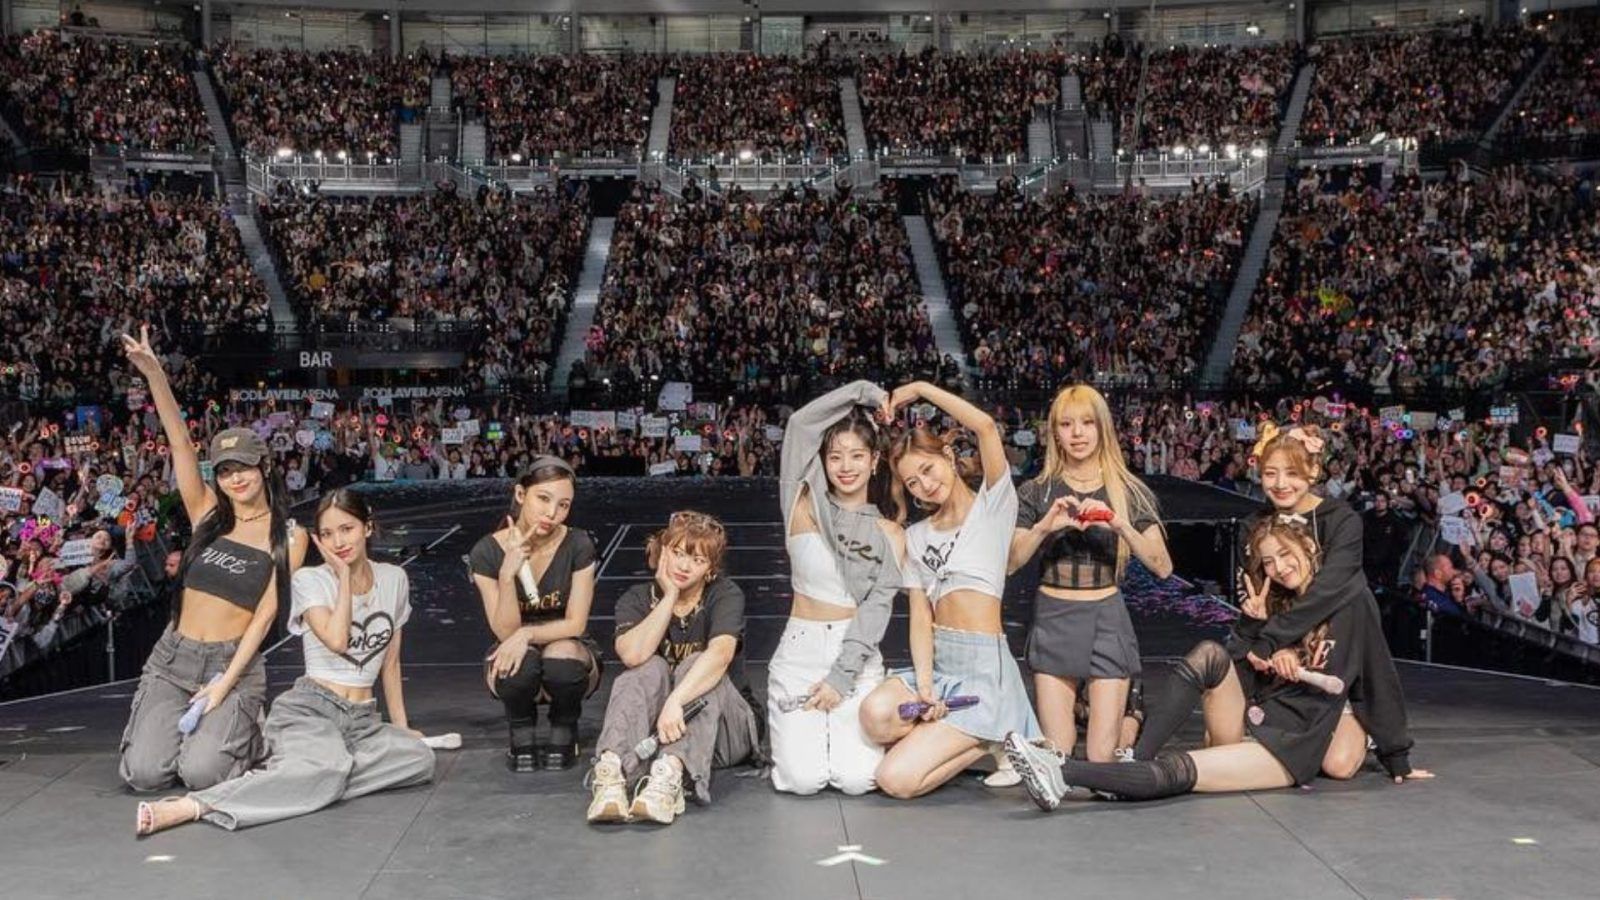 TWICE announces more dates for 'READY TO BE World Tour